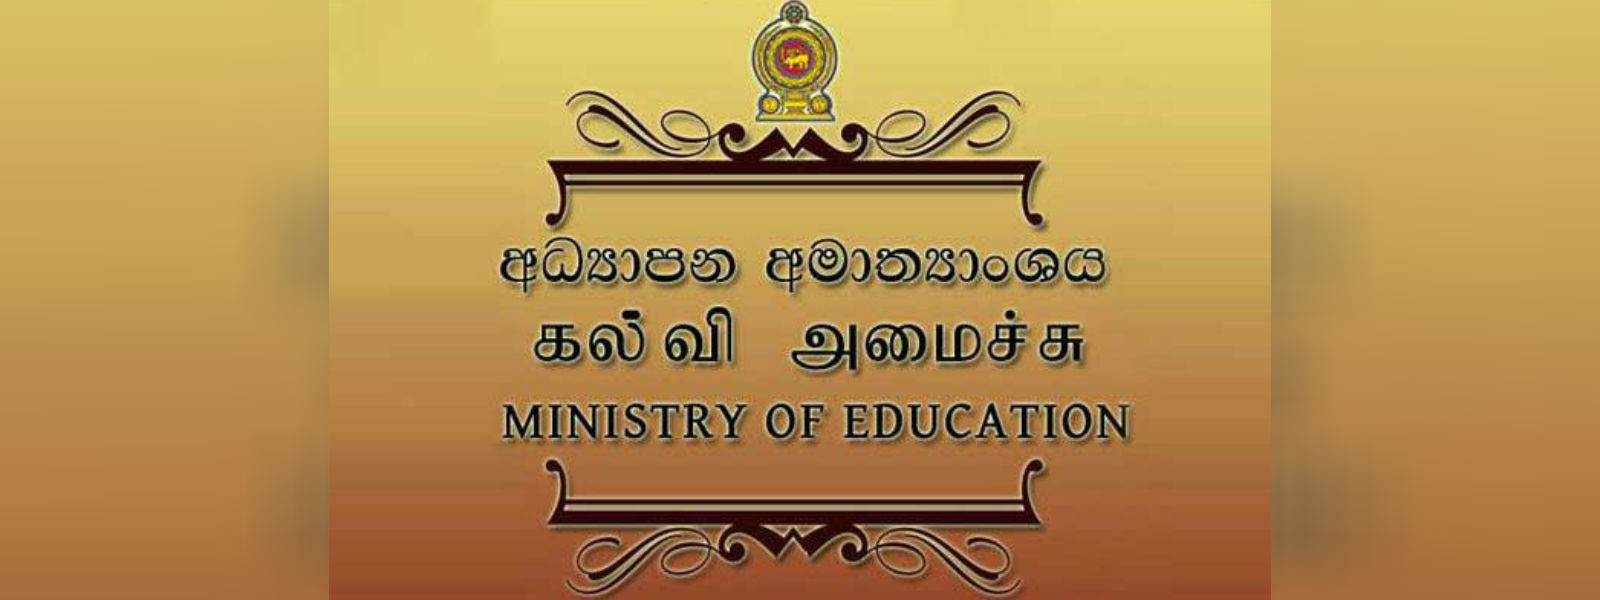 Transfer of principals & teachers in Uva an issue